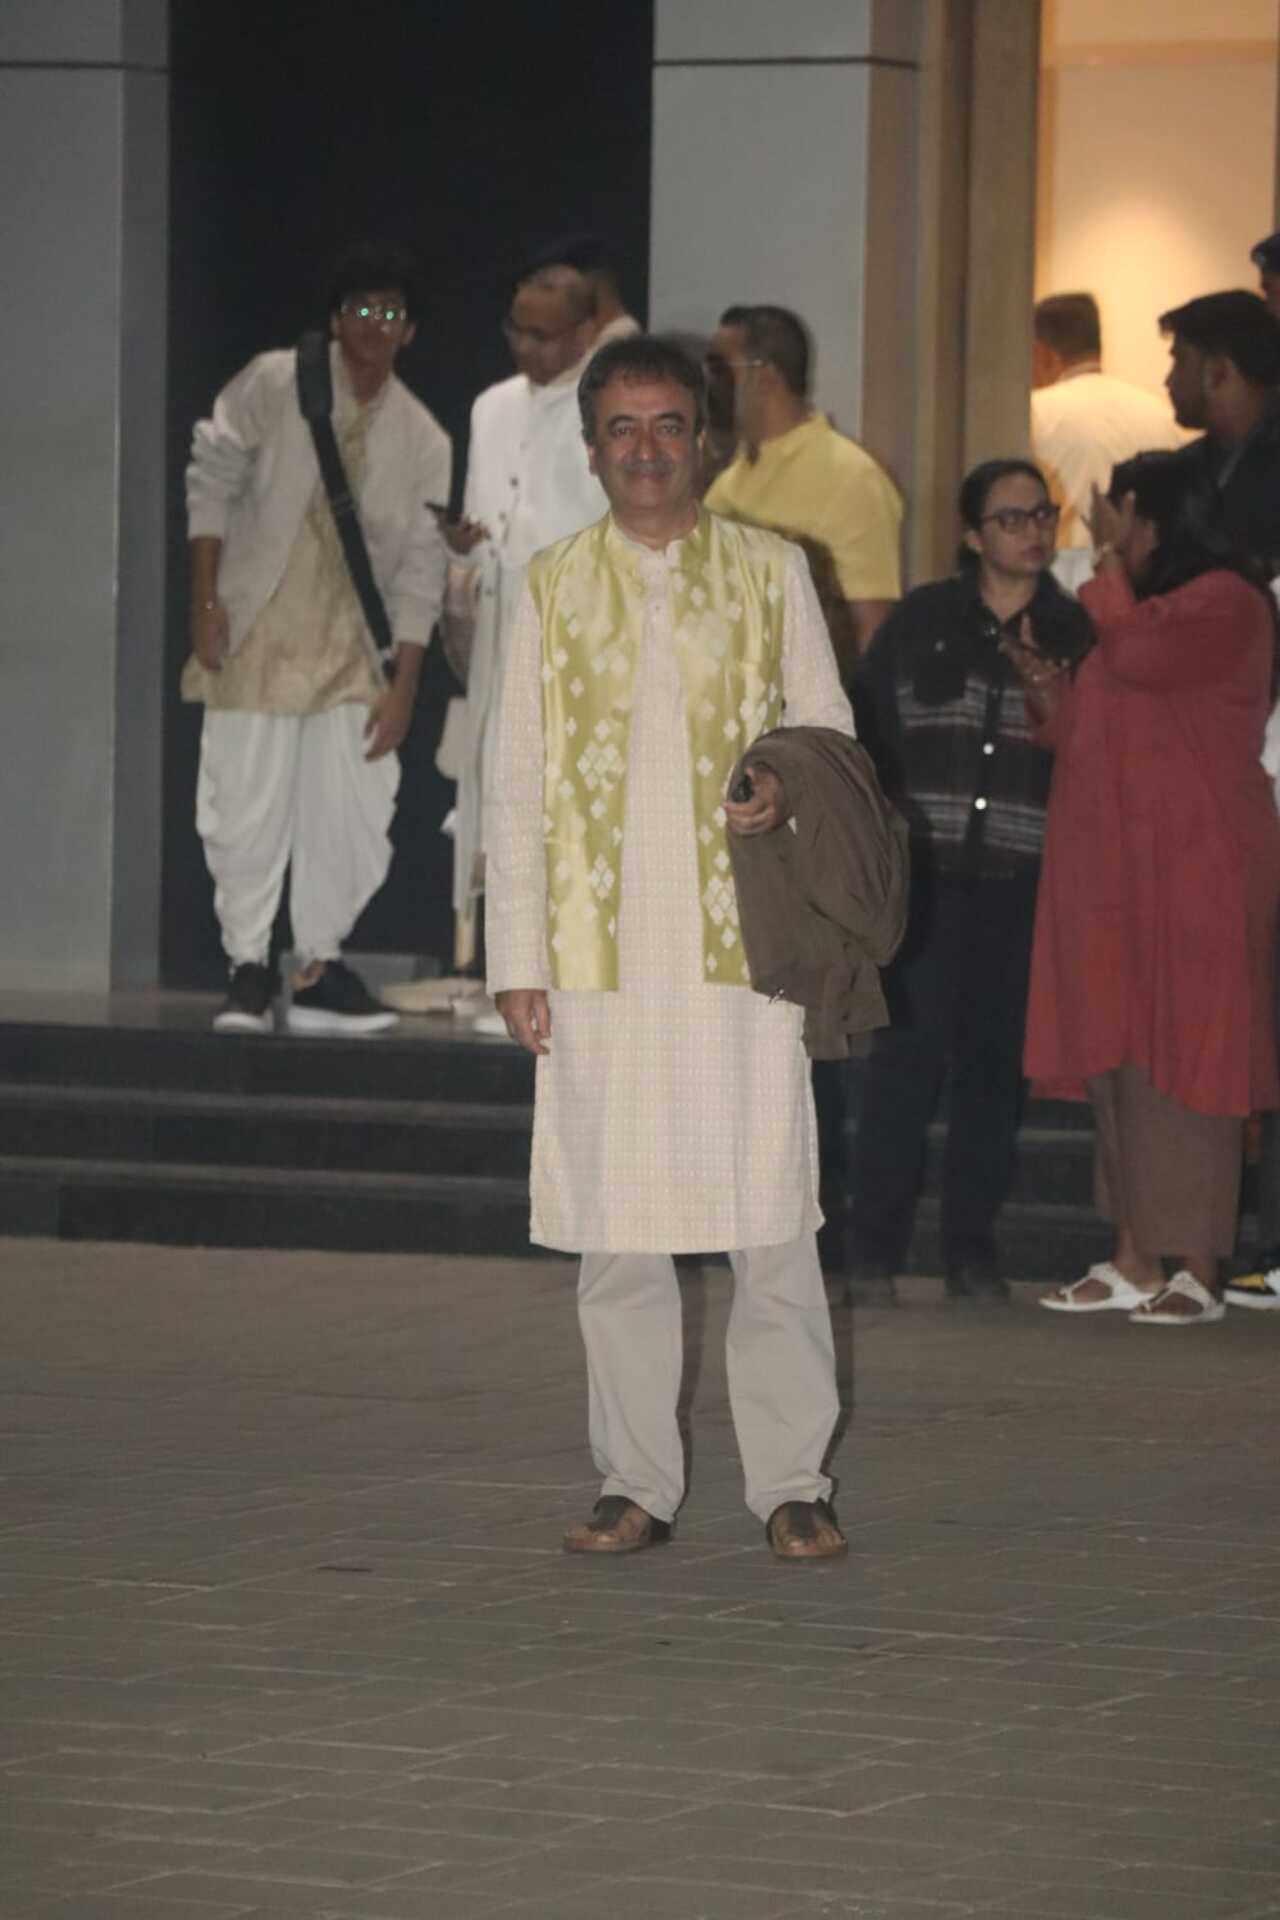 Filmmaker Rajkumar Hirani was also spotted in Indian traditional attire on Monday morning on his way to Ayodhya for the Ram mandir consecration